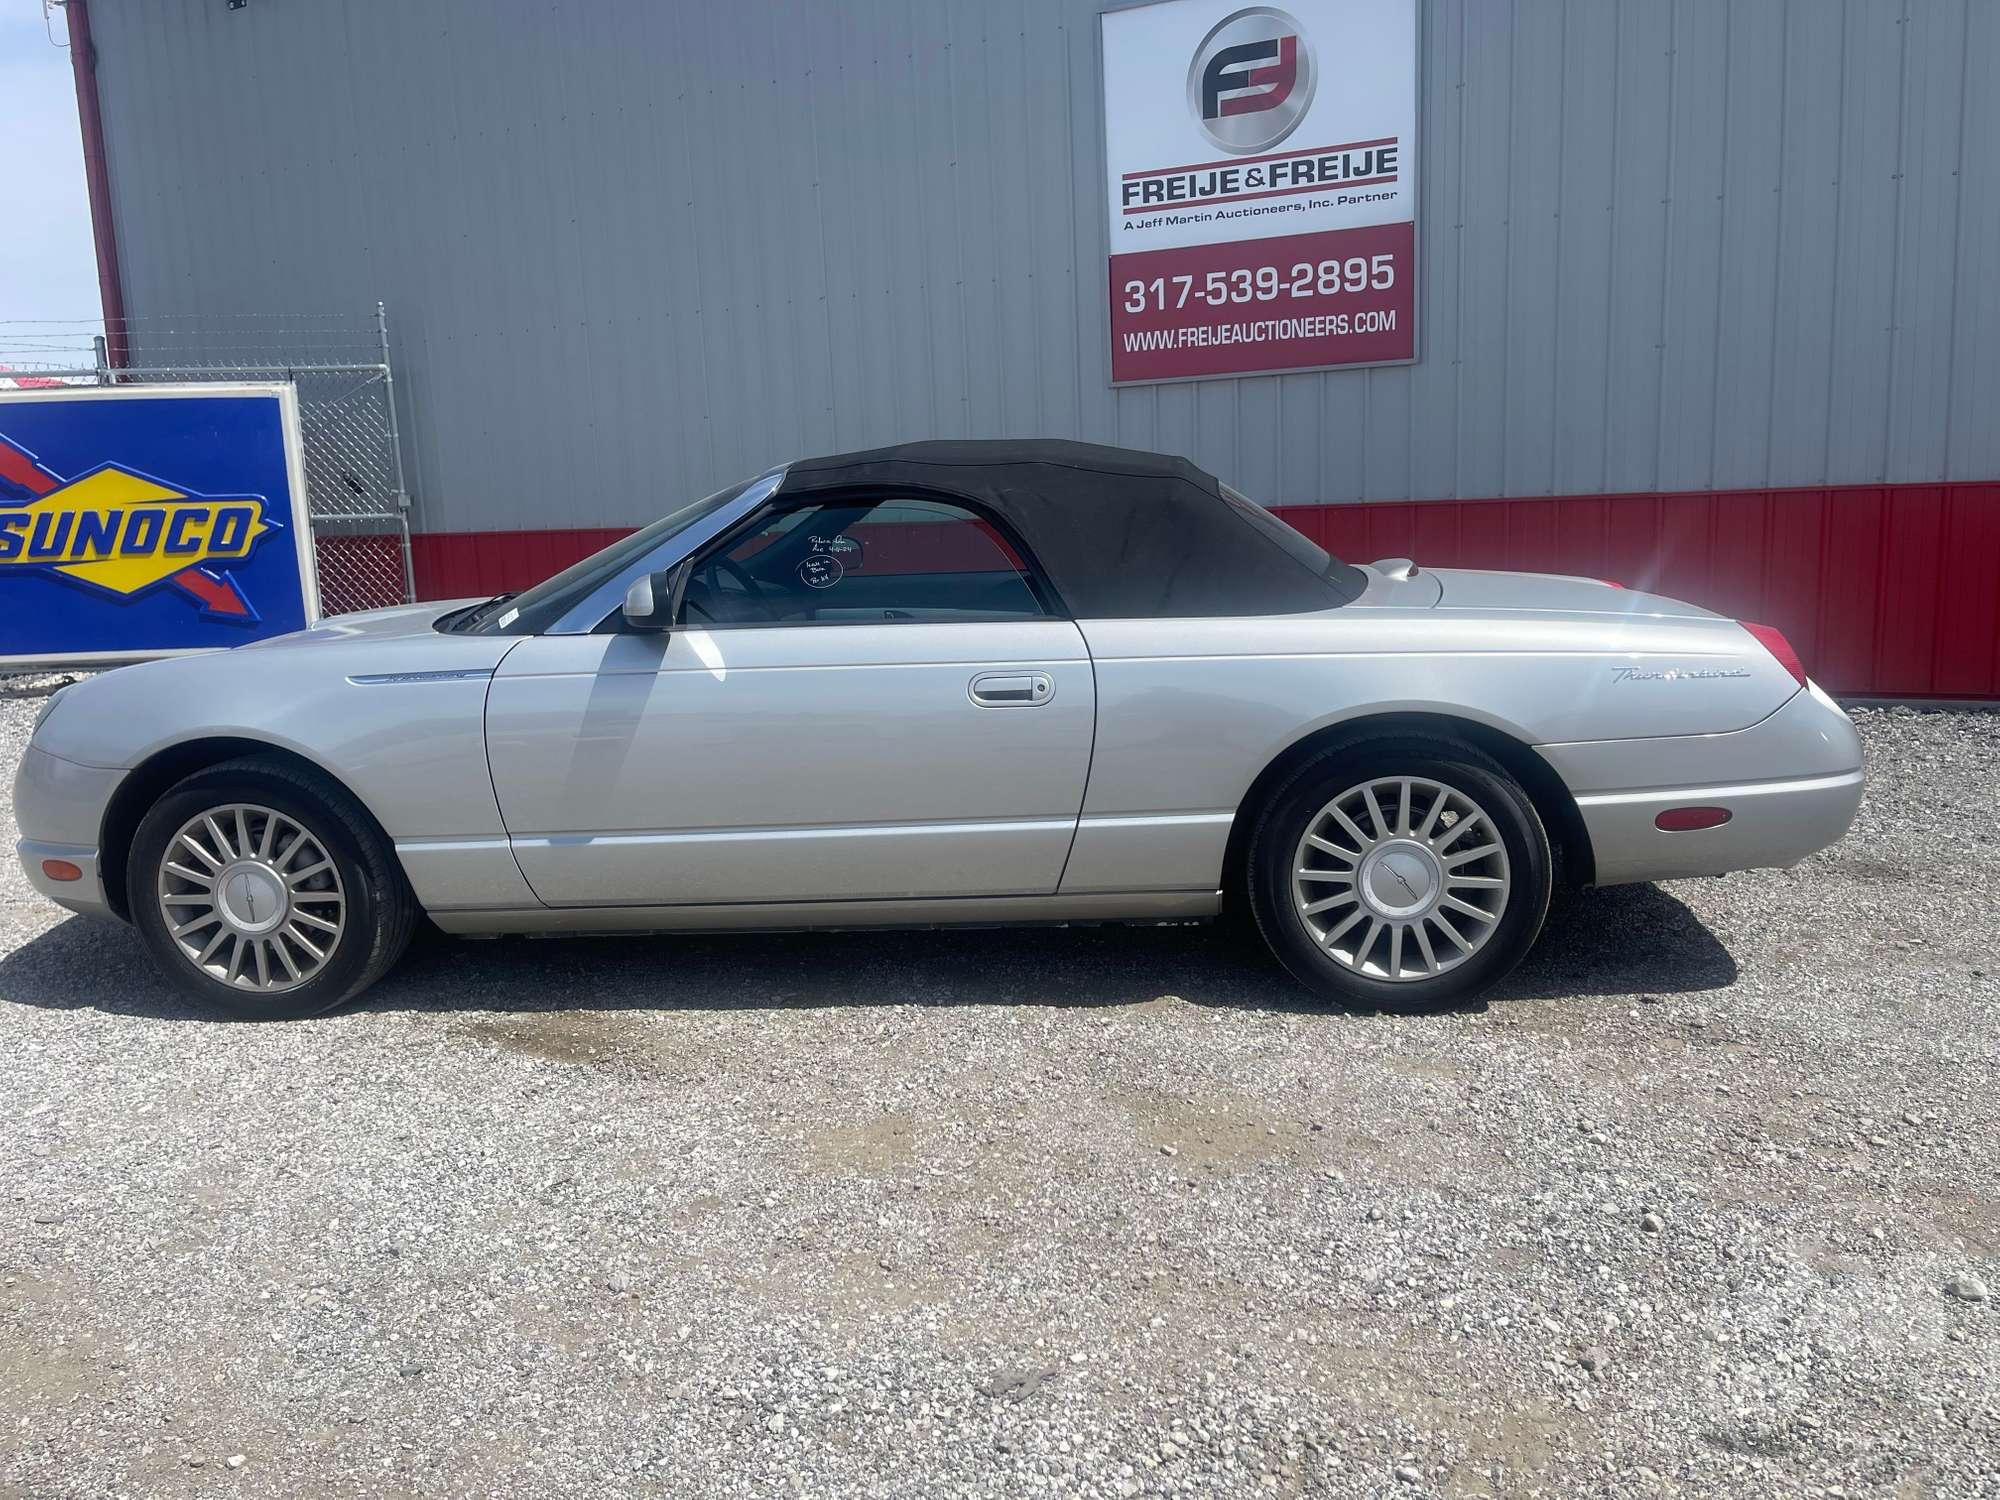 2005 FORD THUNDERBIRD VIN: 1FAHP60A05Y106702 COUPE